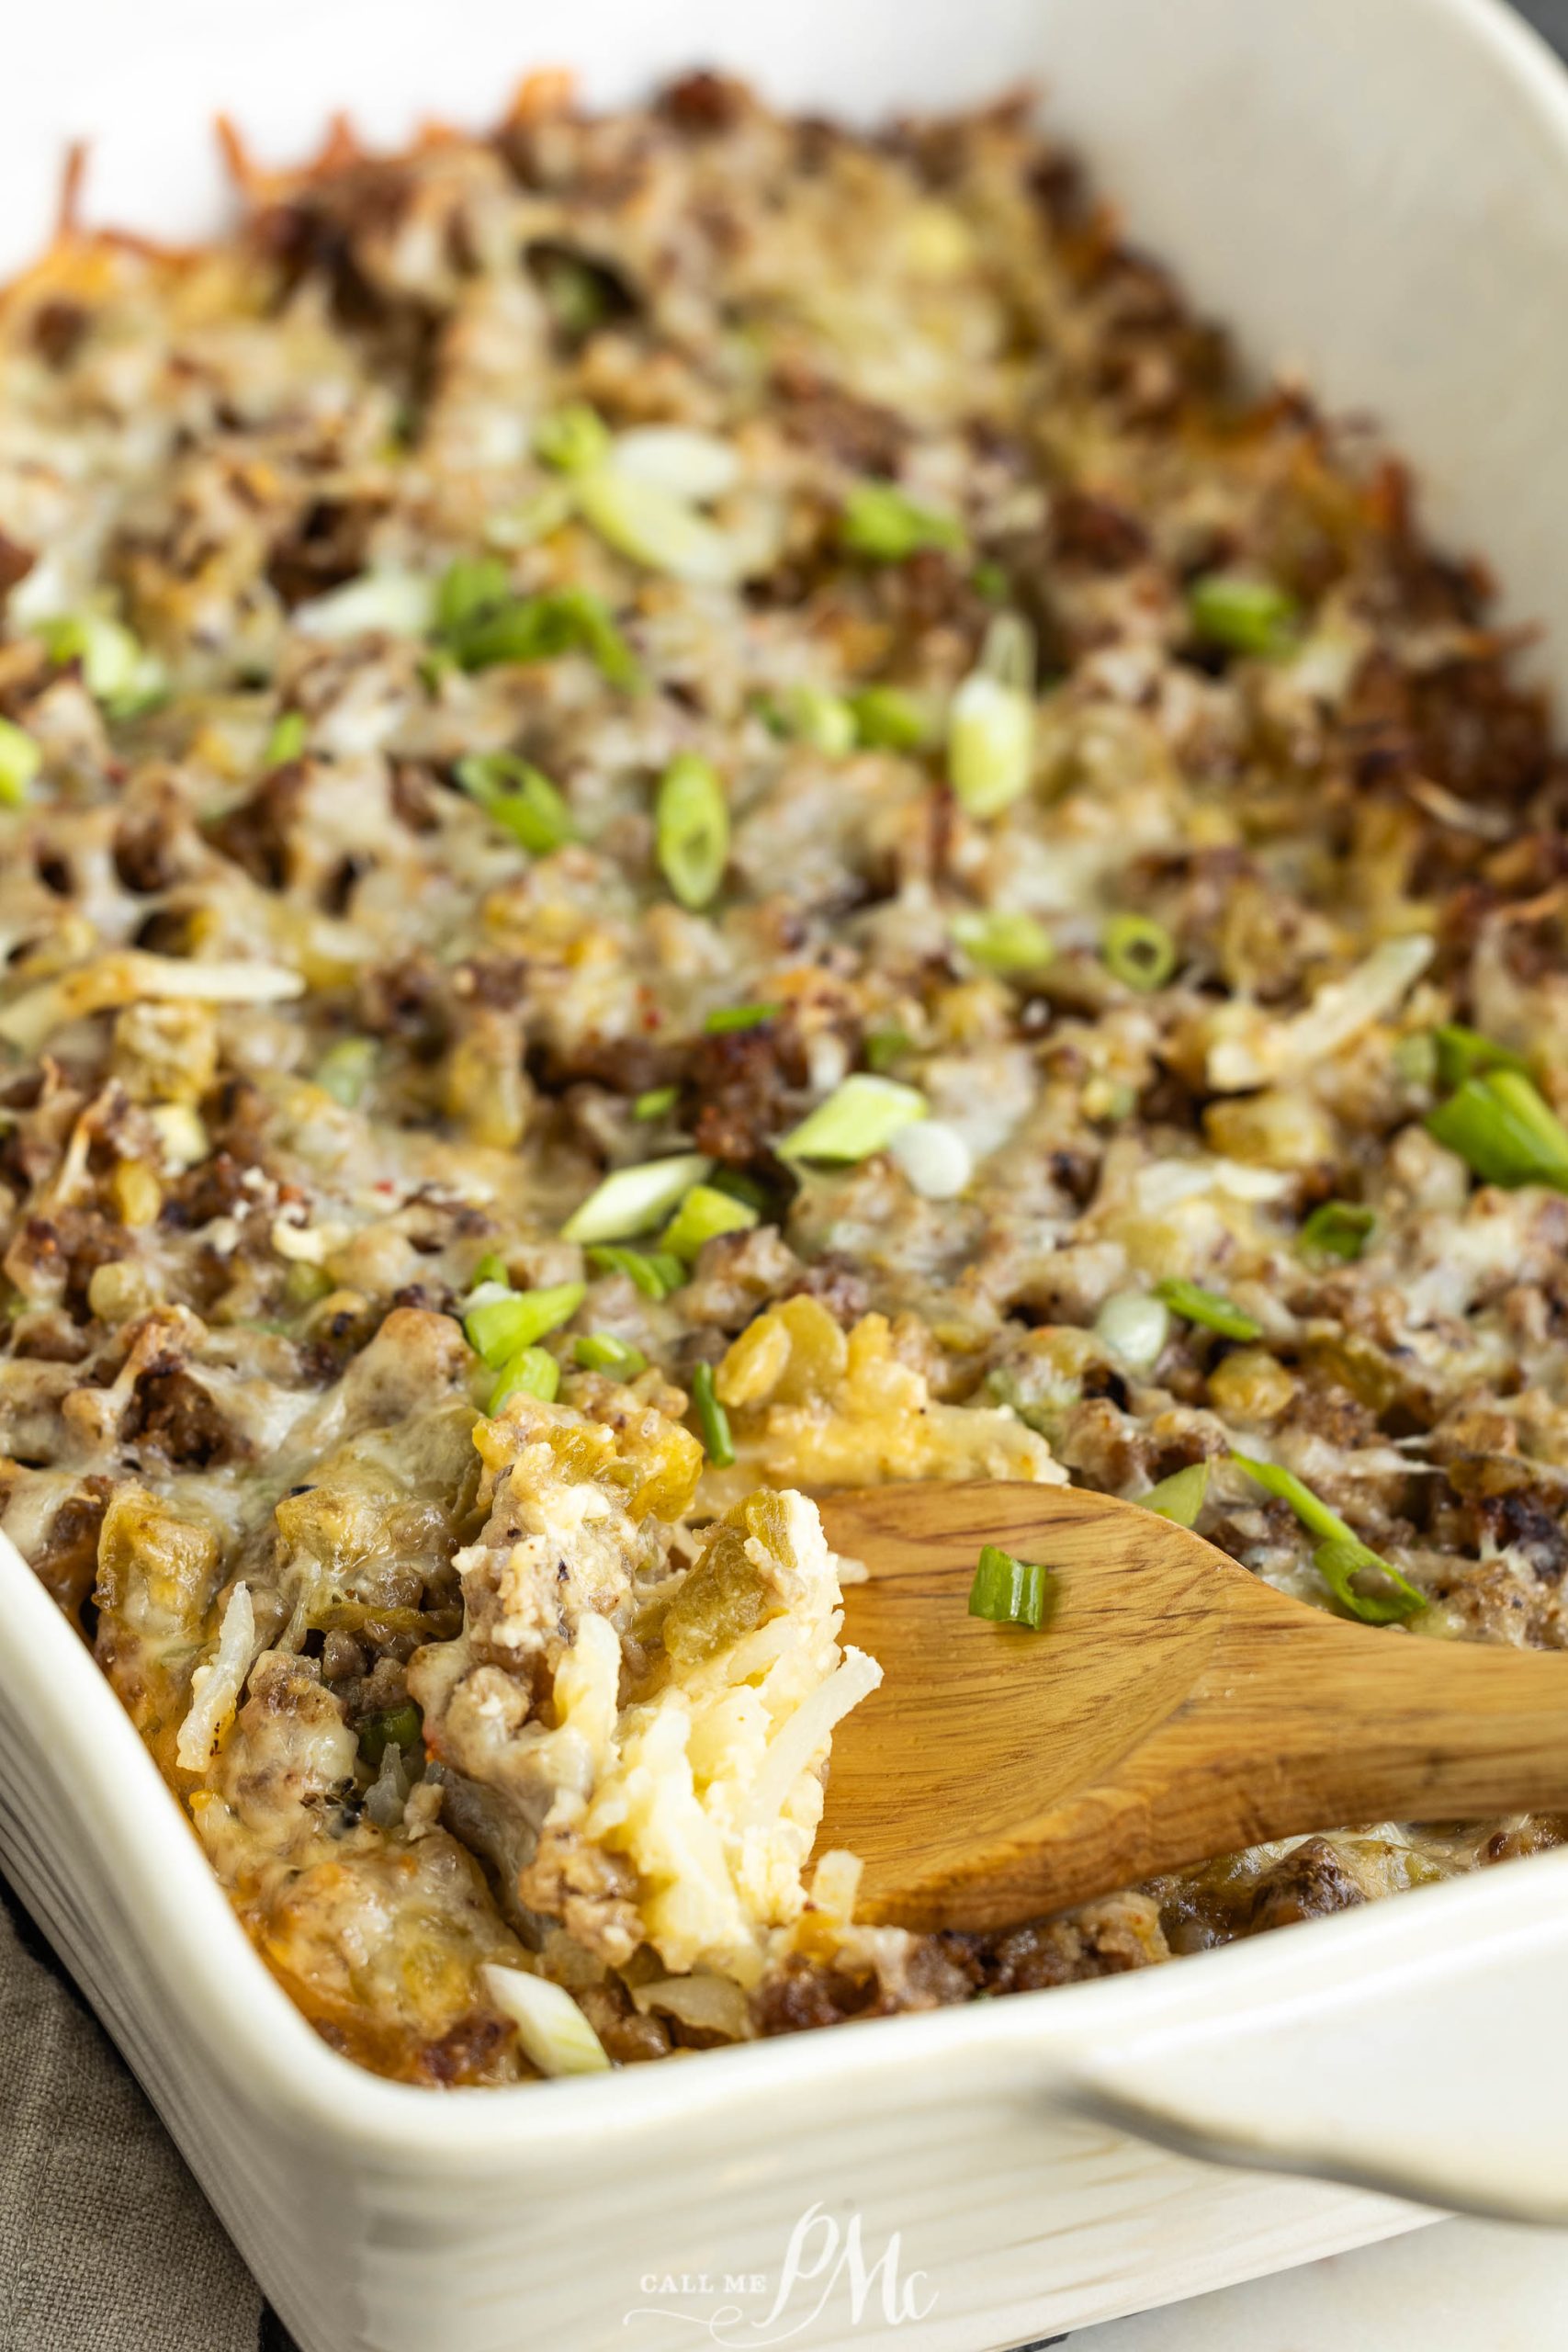 A Overnight Sausage Hash Brown Casserole with a wooden spoon in it.